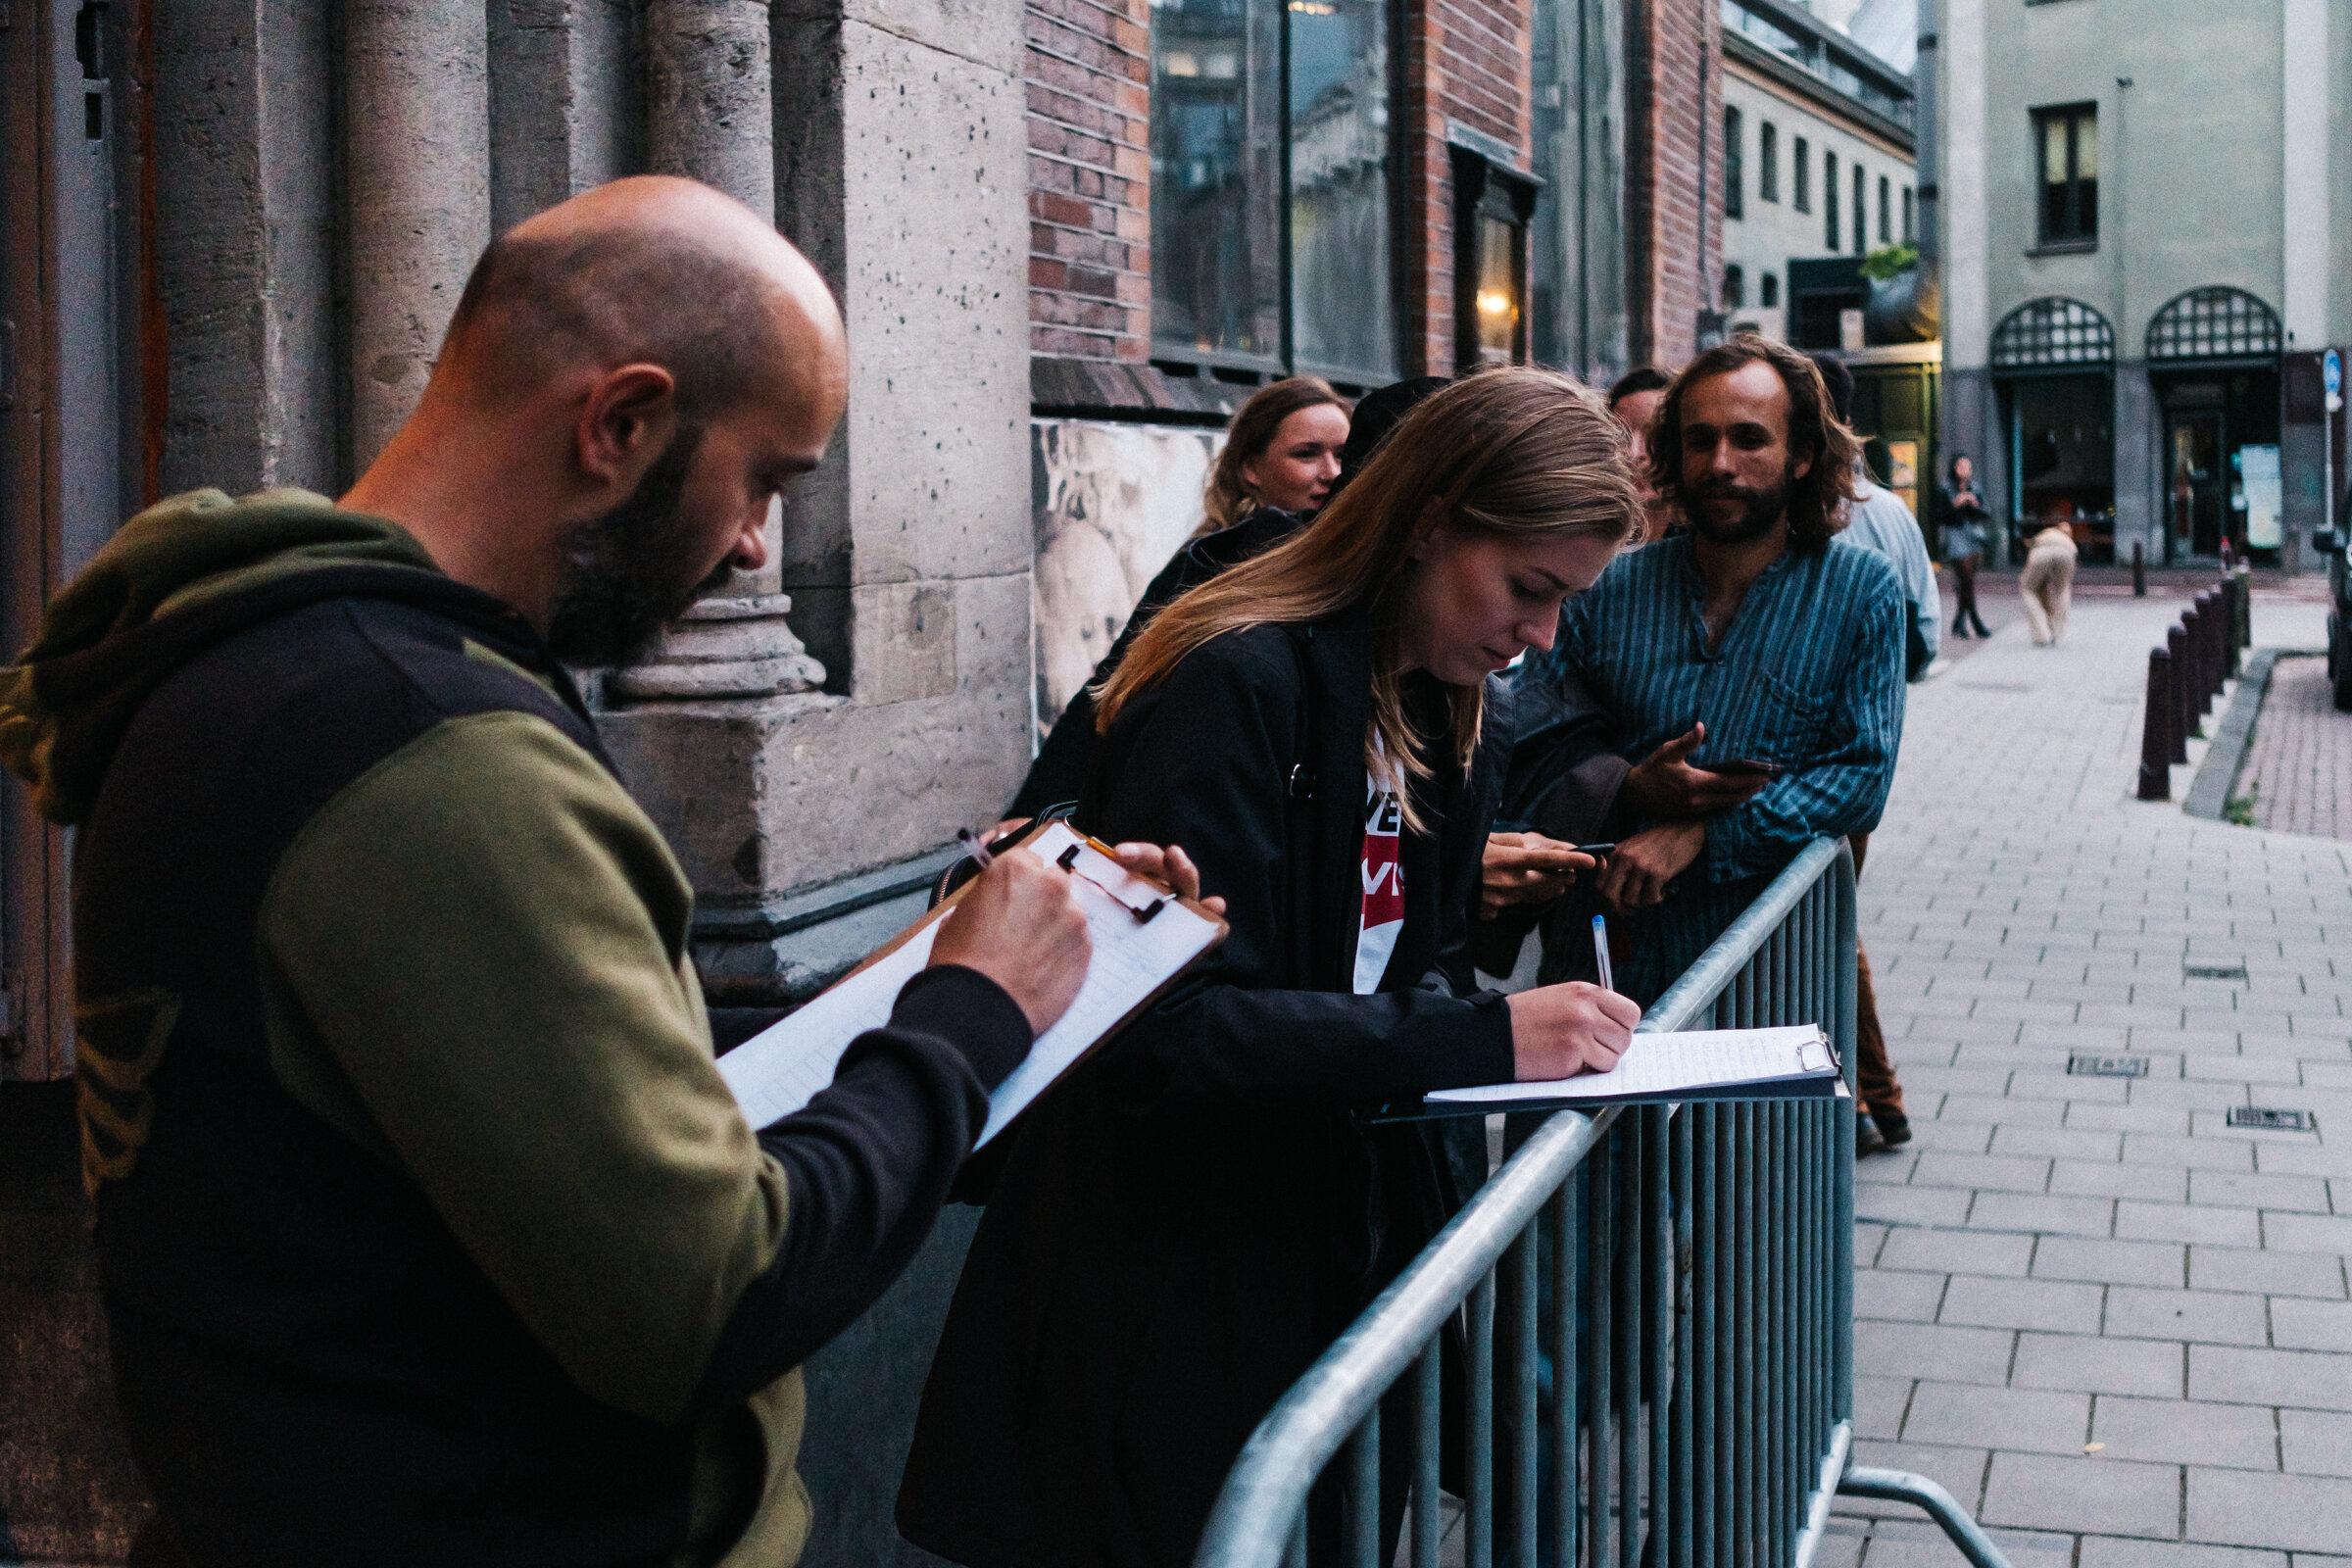  Before allowed entrance, all visitors are requested to fill out their contact details at Paradiso, Amsterdam, August 25, 2020.  